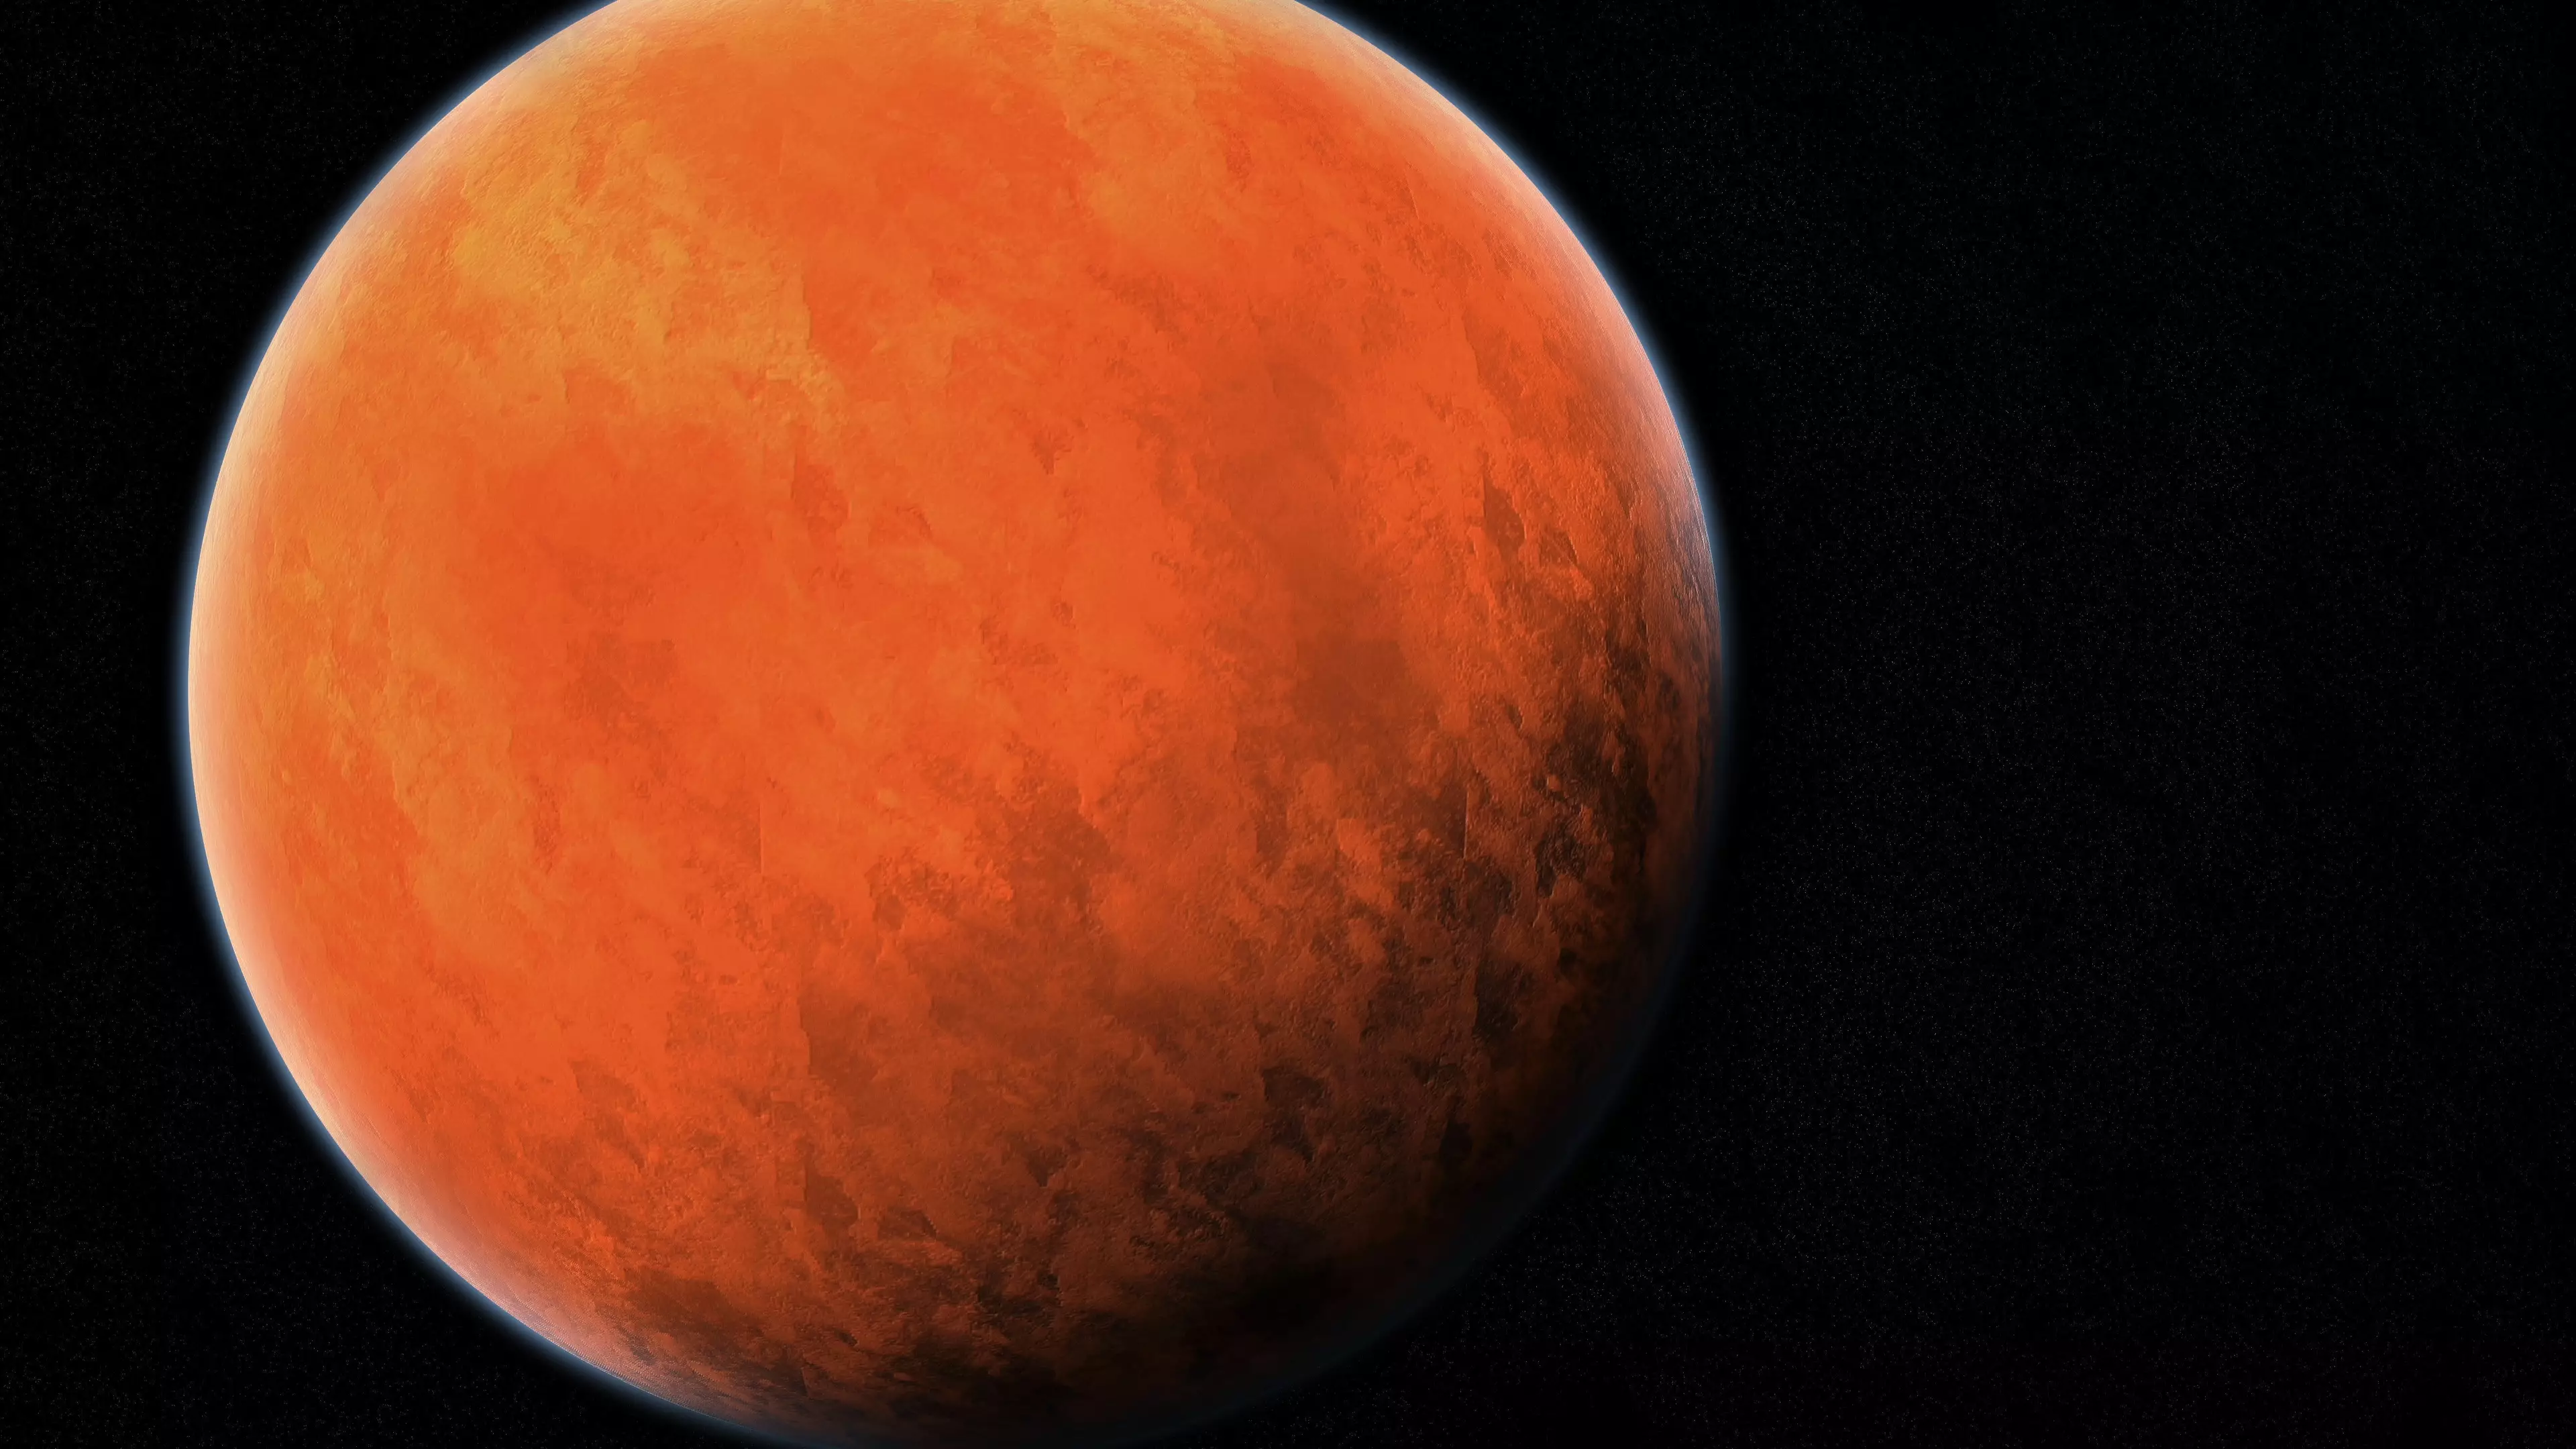 NASA Is Looking For People To Take Part In A Simulated Mars Mission